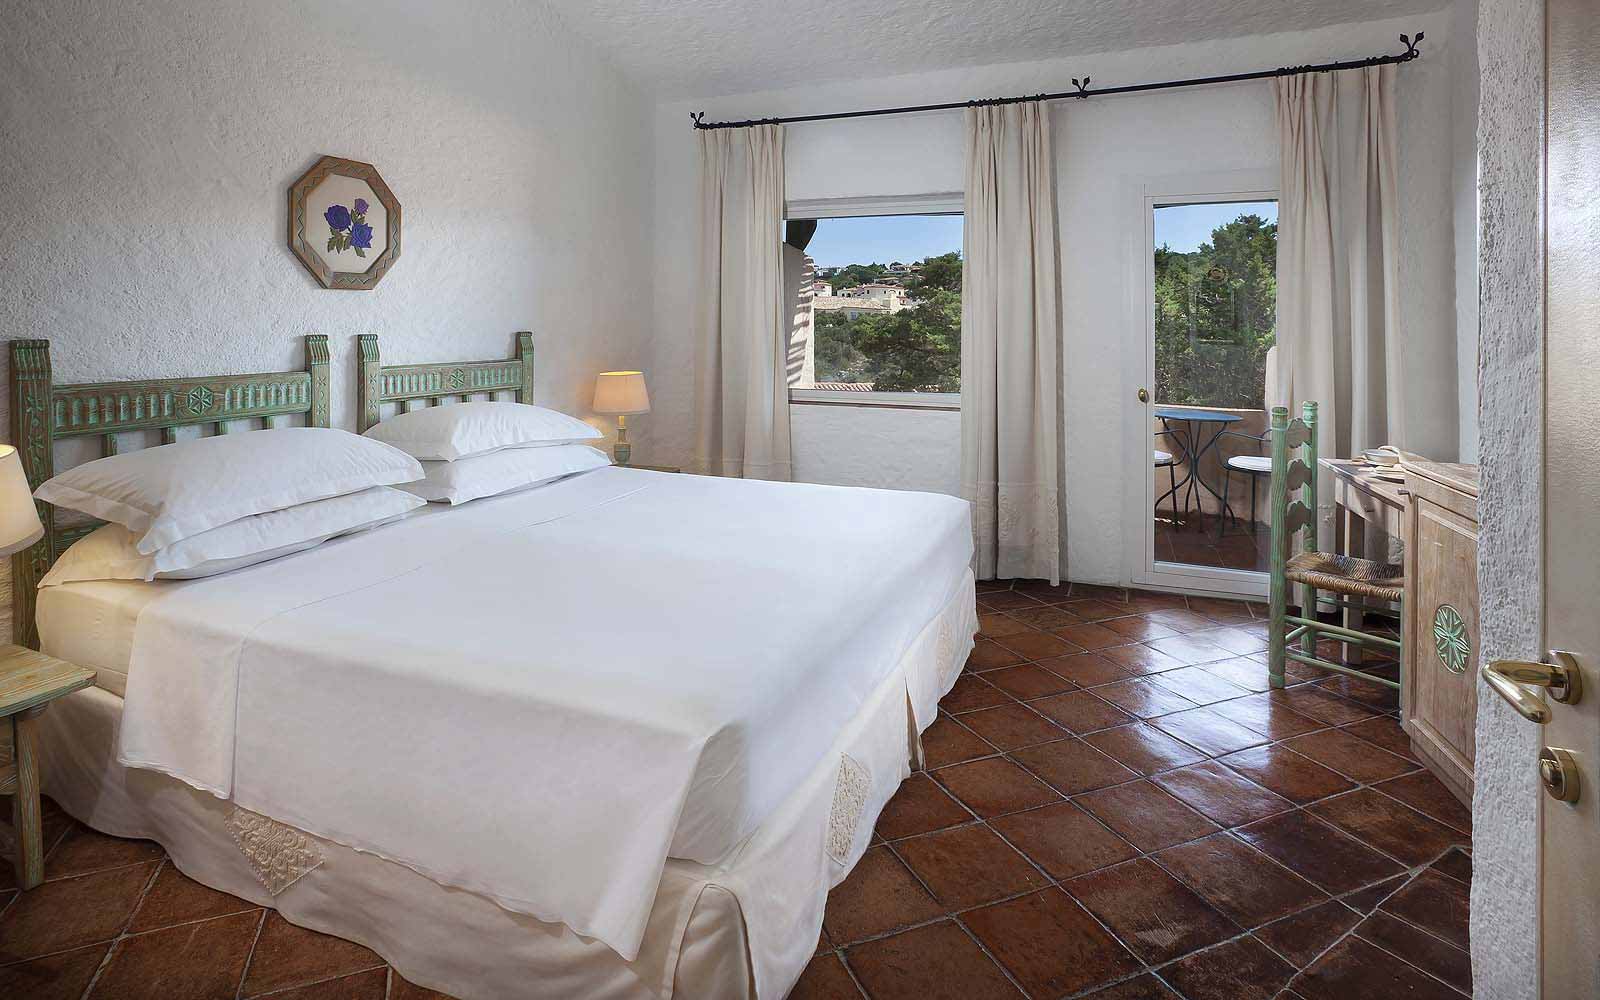 A Superior Room with pool view at the Hotel Cervo